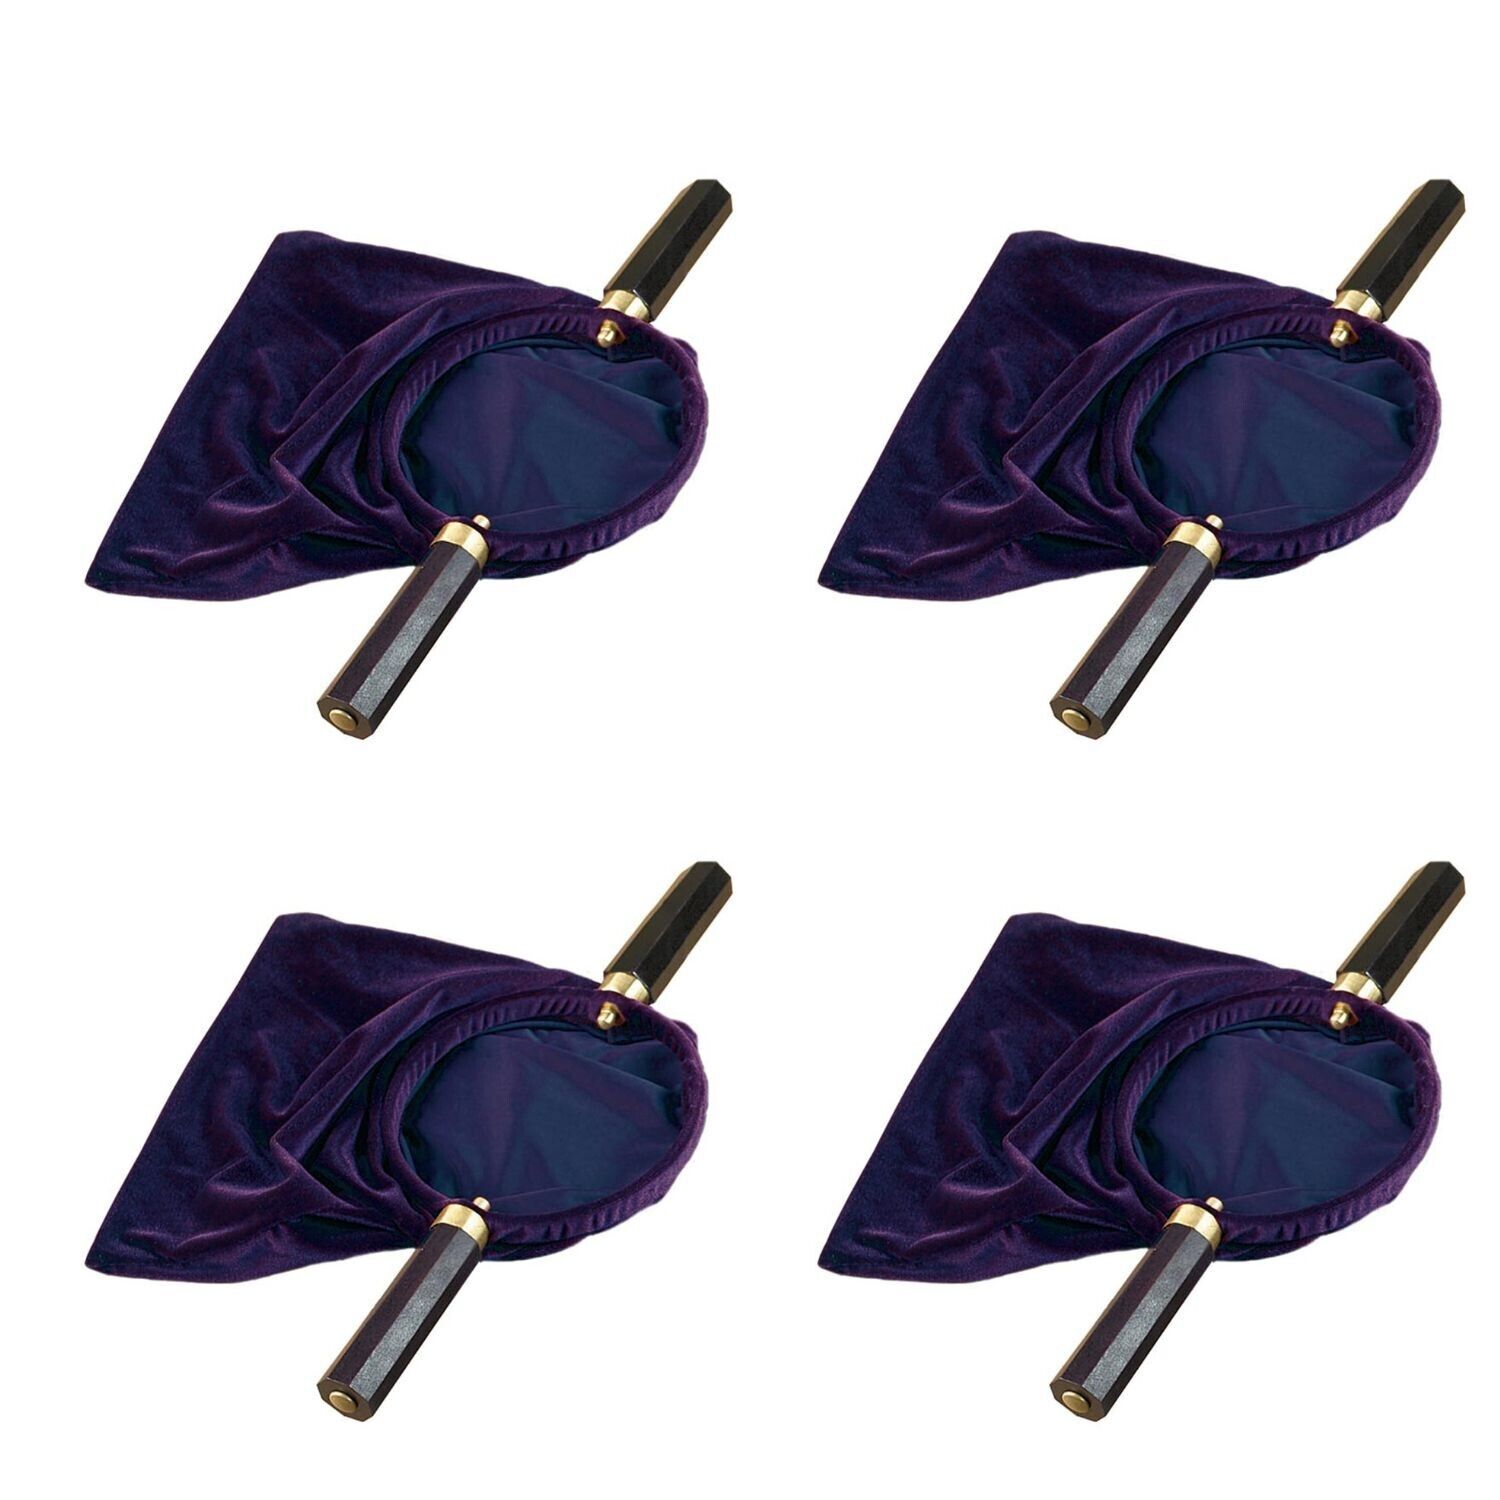 Two Handle Purple Offering Bag Collection Bags For Churches or Chapels Set of 4